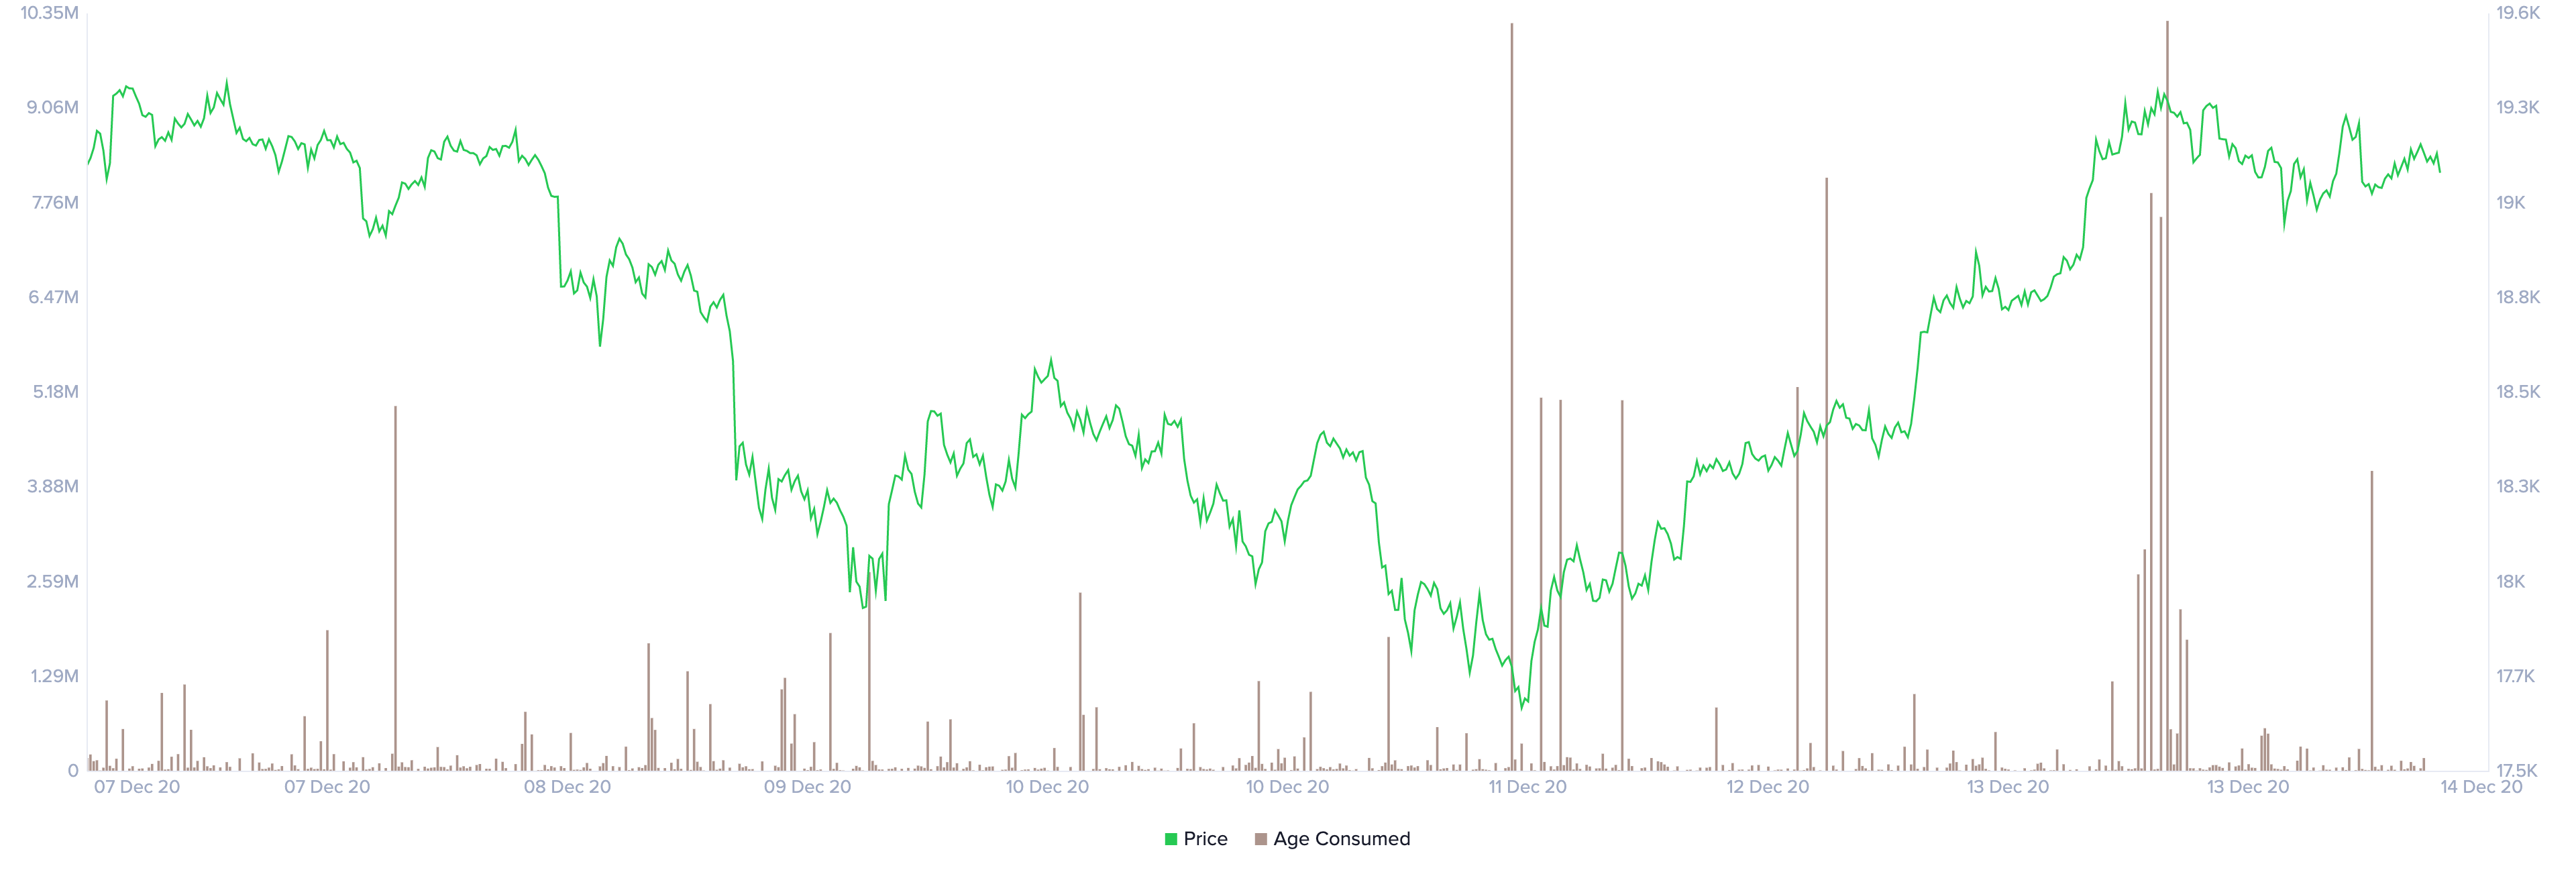 BTC's Age Consumed chart